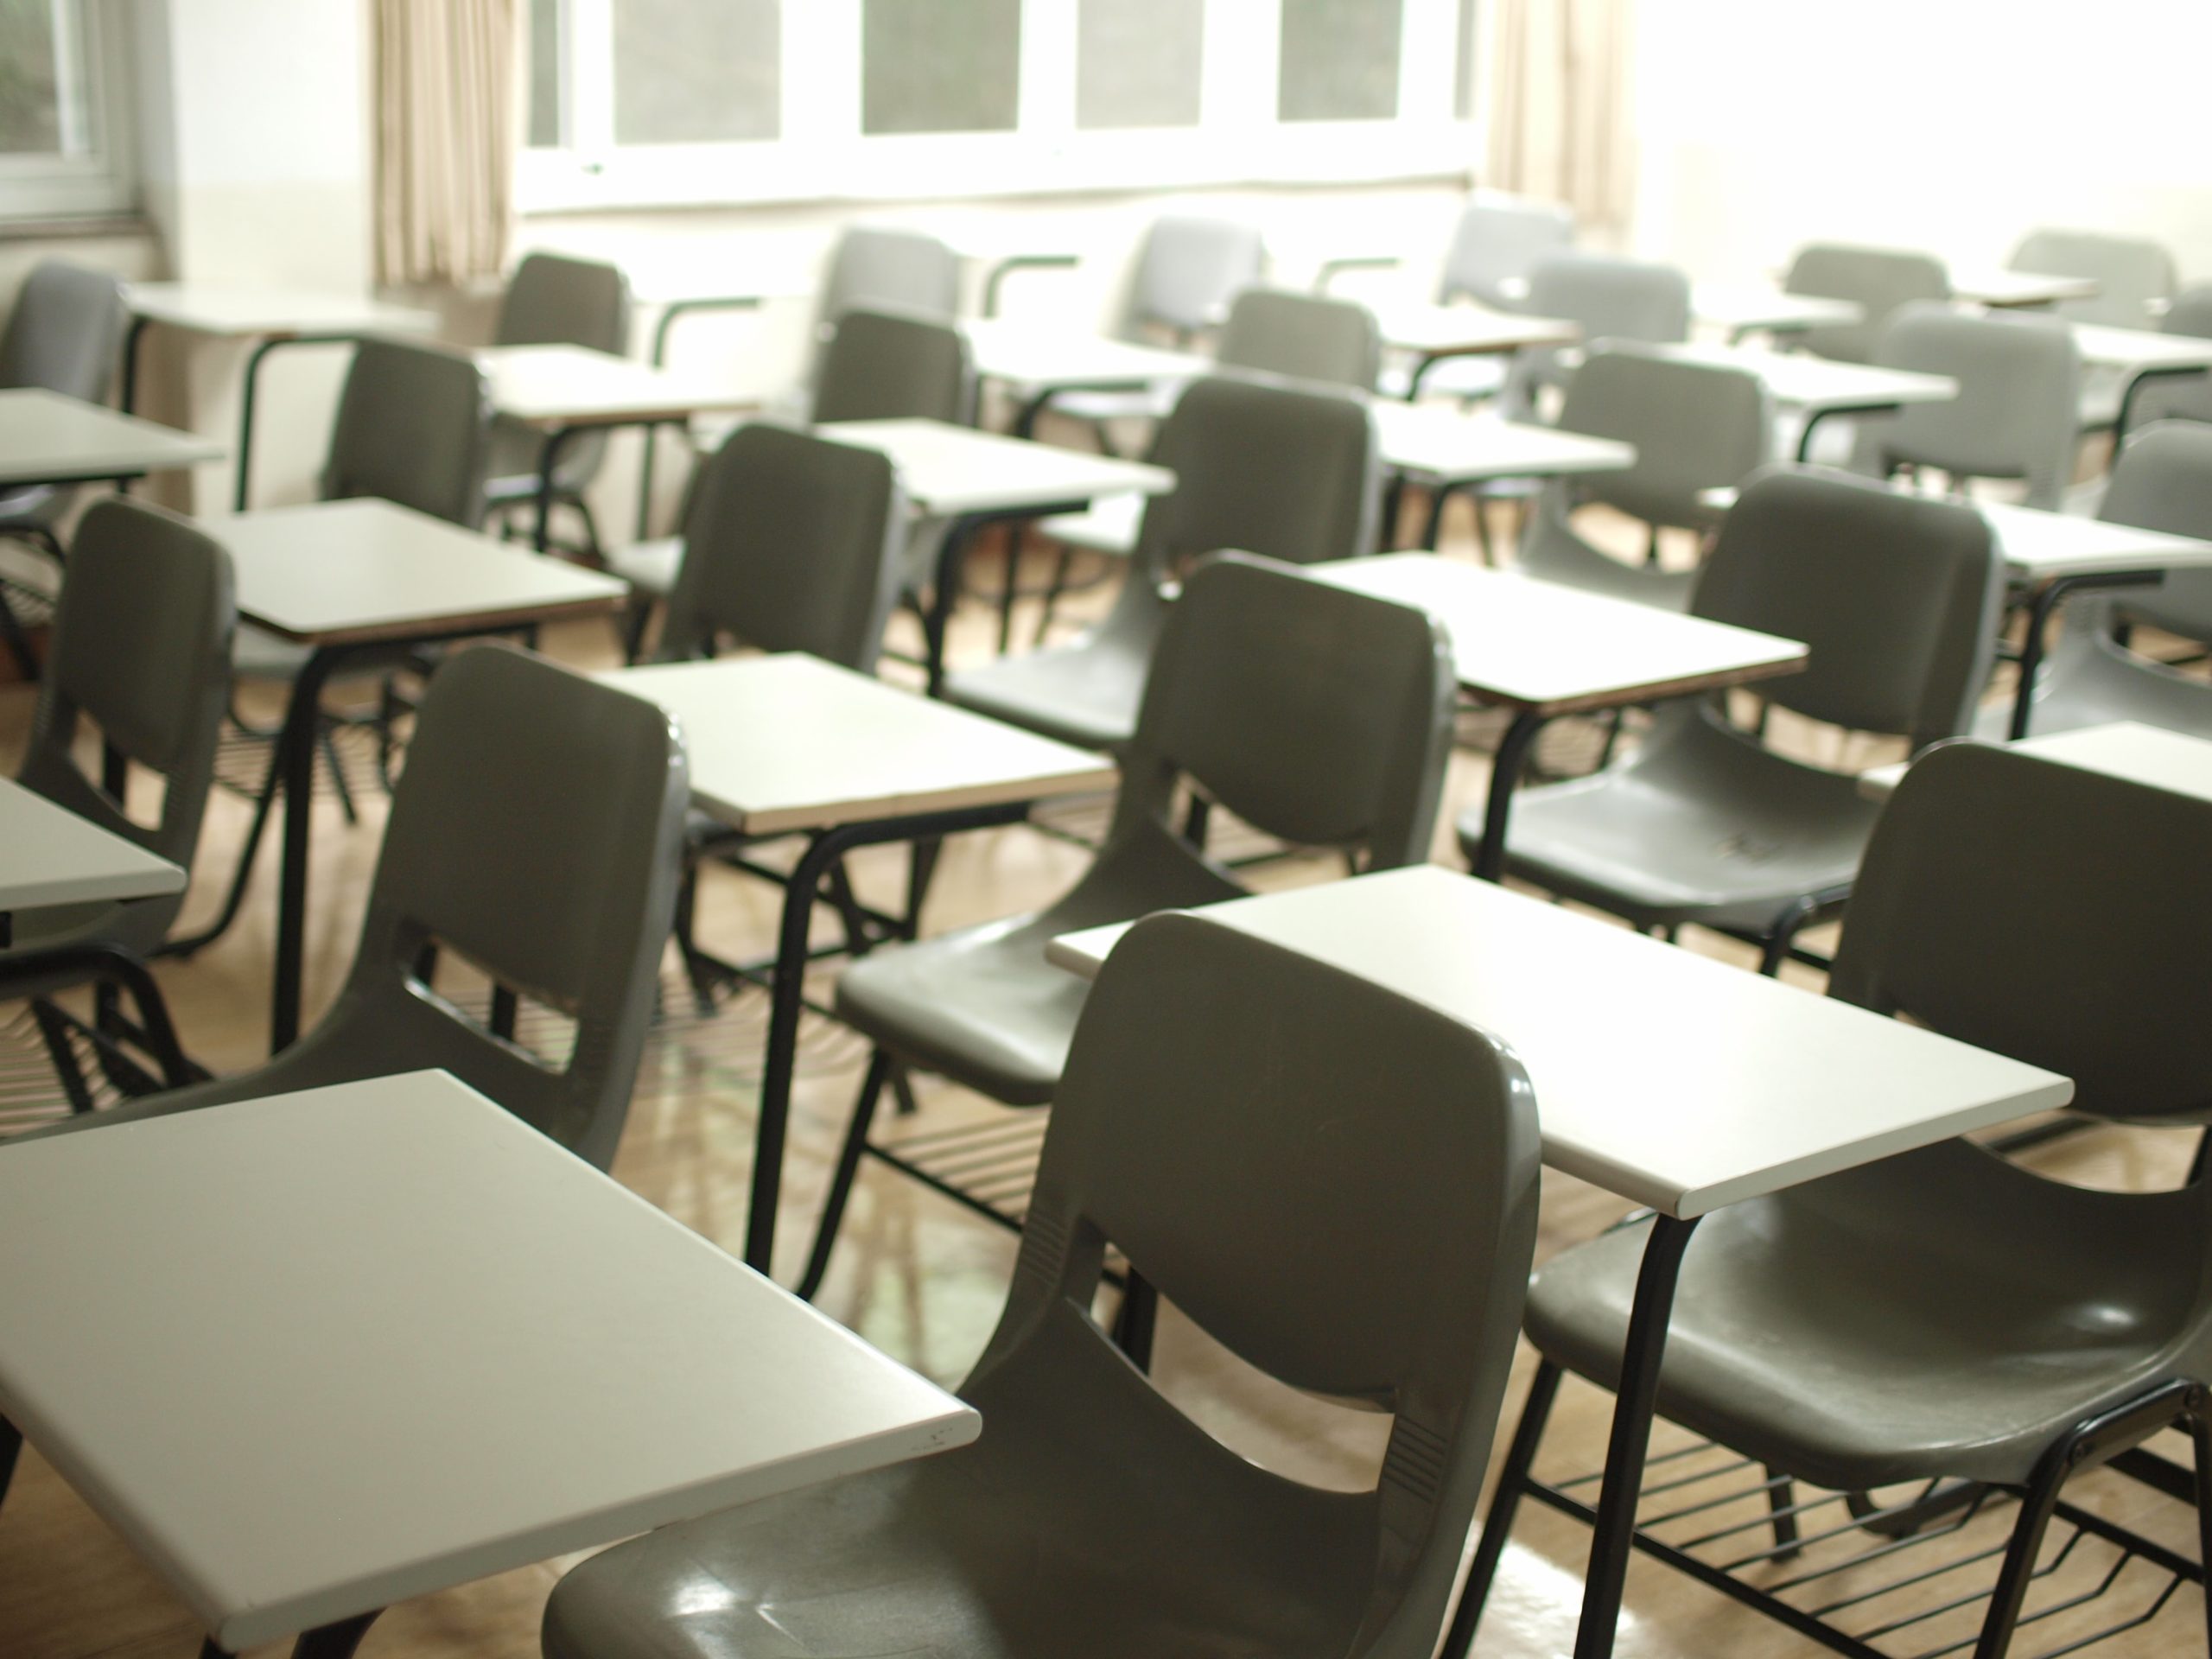 Rows of empty desks and chairs in a classroom